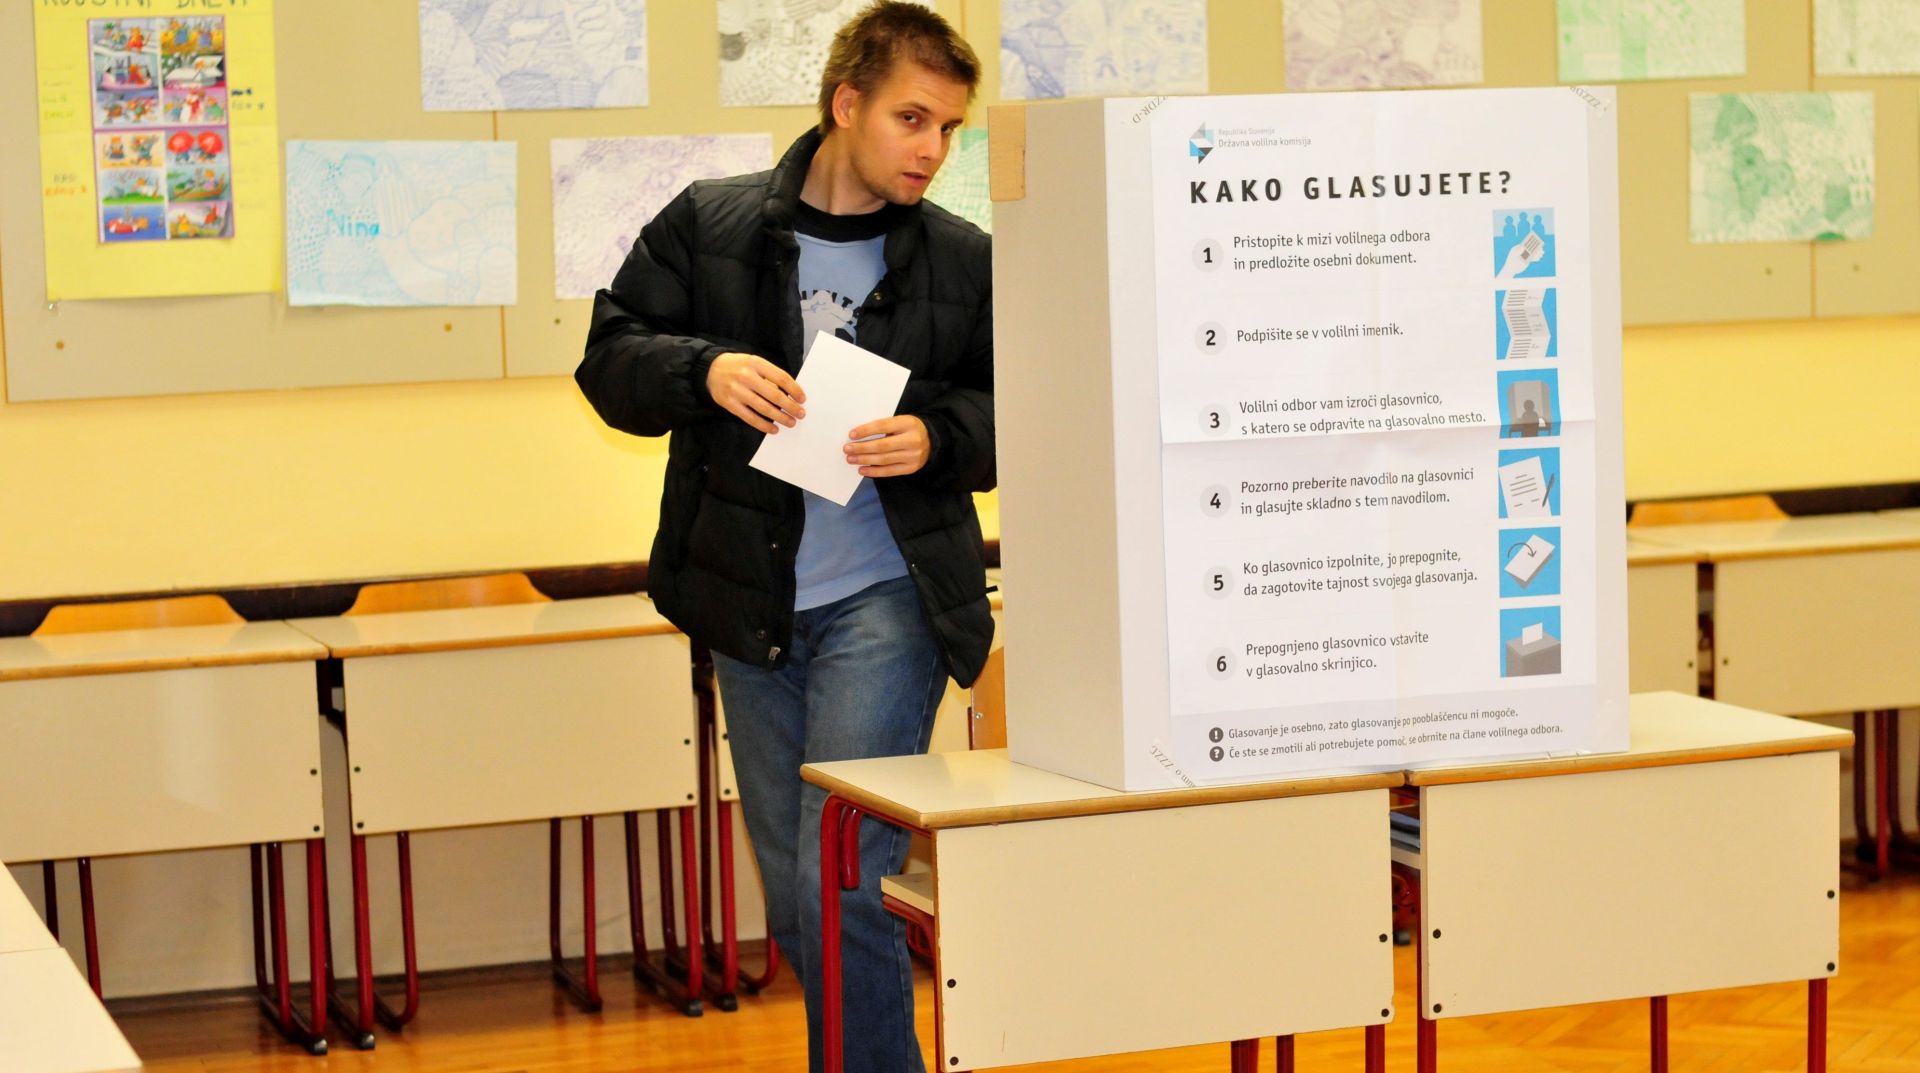 epa05076110 A man arraives to cast his ballot at a polling station in Ljubljana, Slovenia on 20 December 2015, during the referendum to repeal the law allowing same-sex marriages.  EPA/IGOR KUPLJENIK